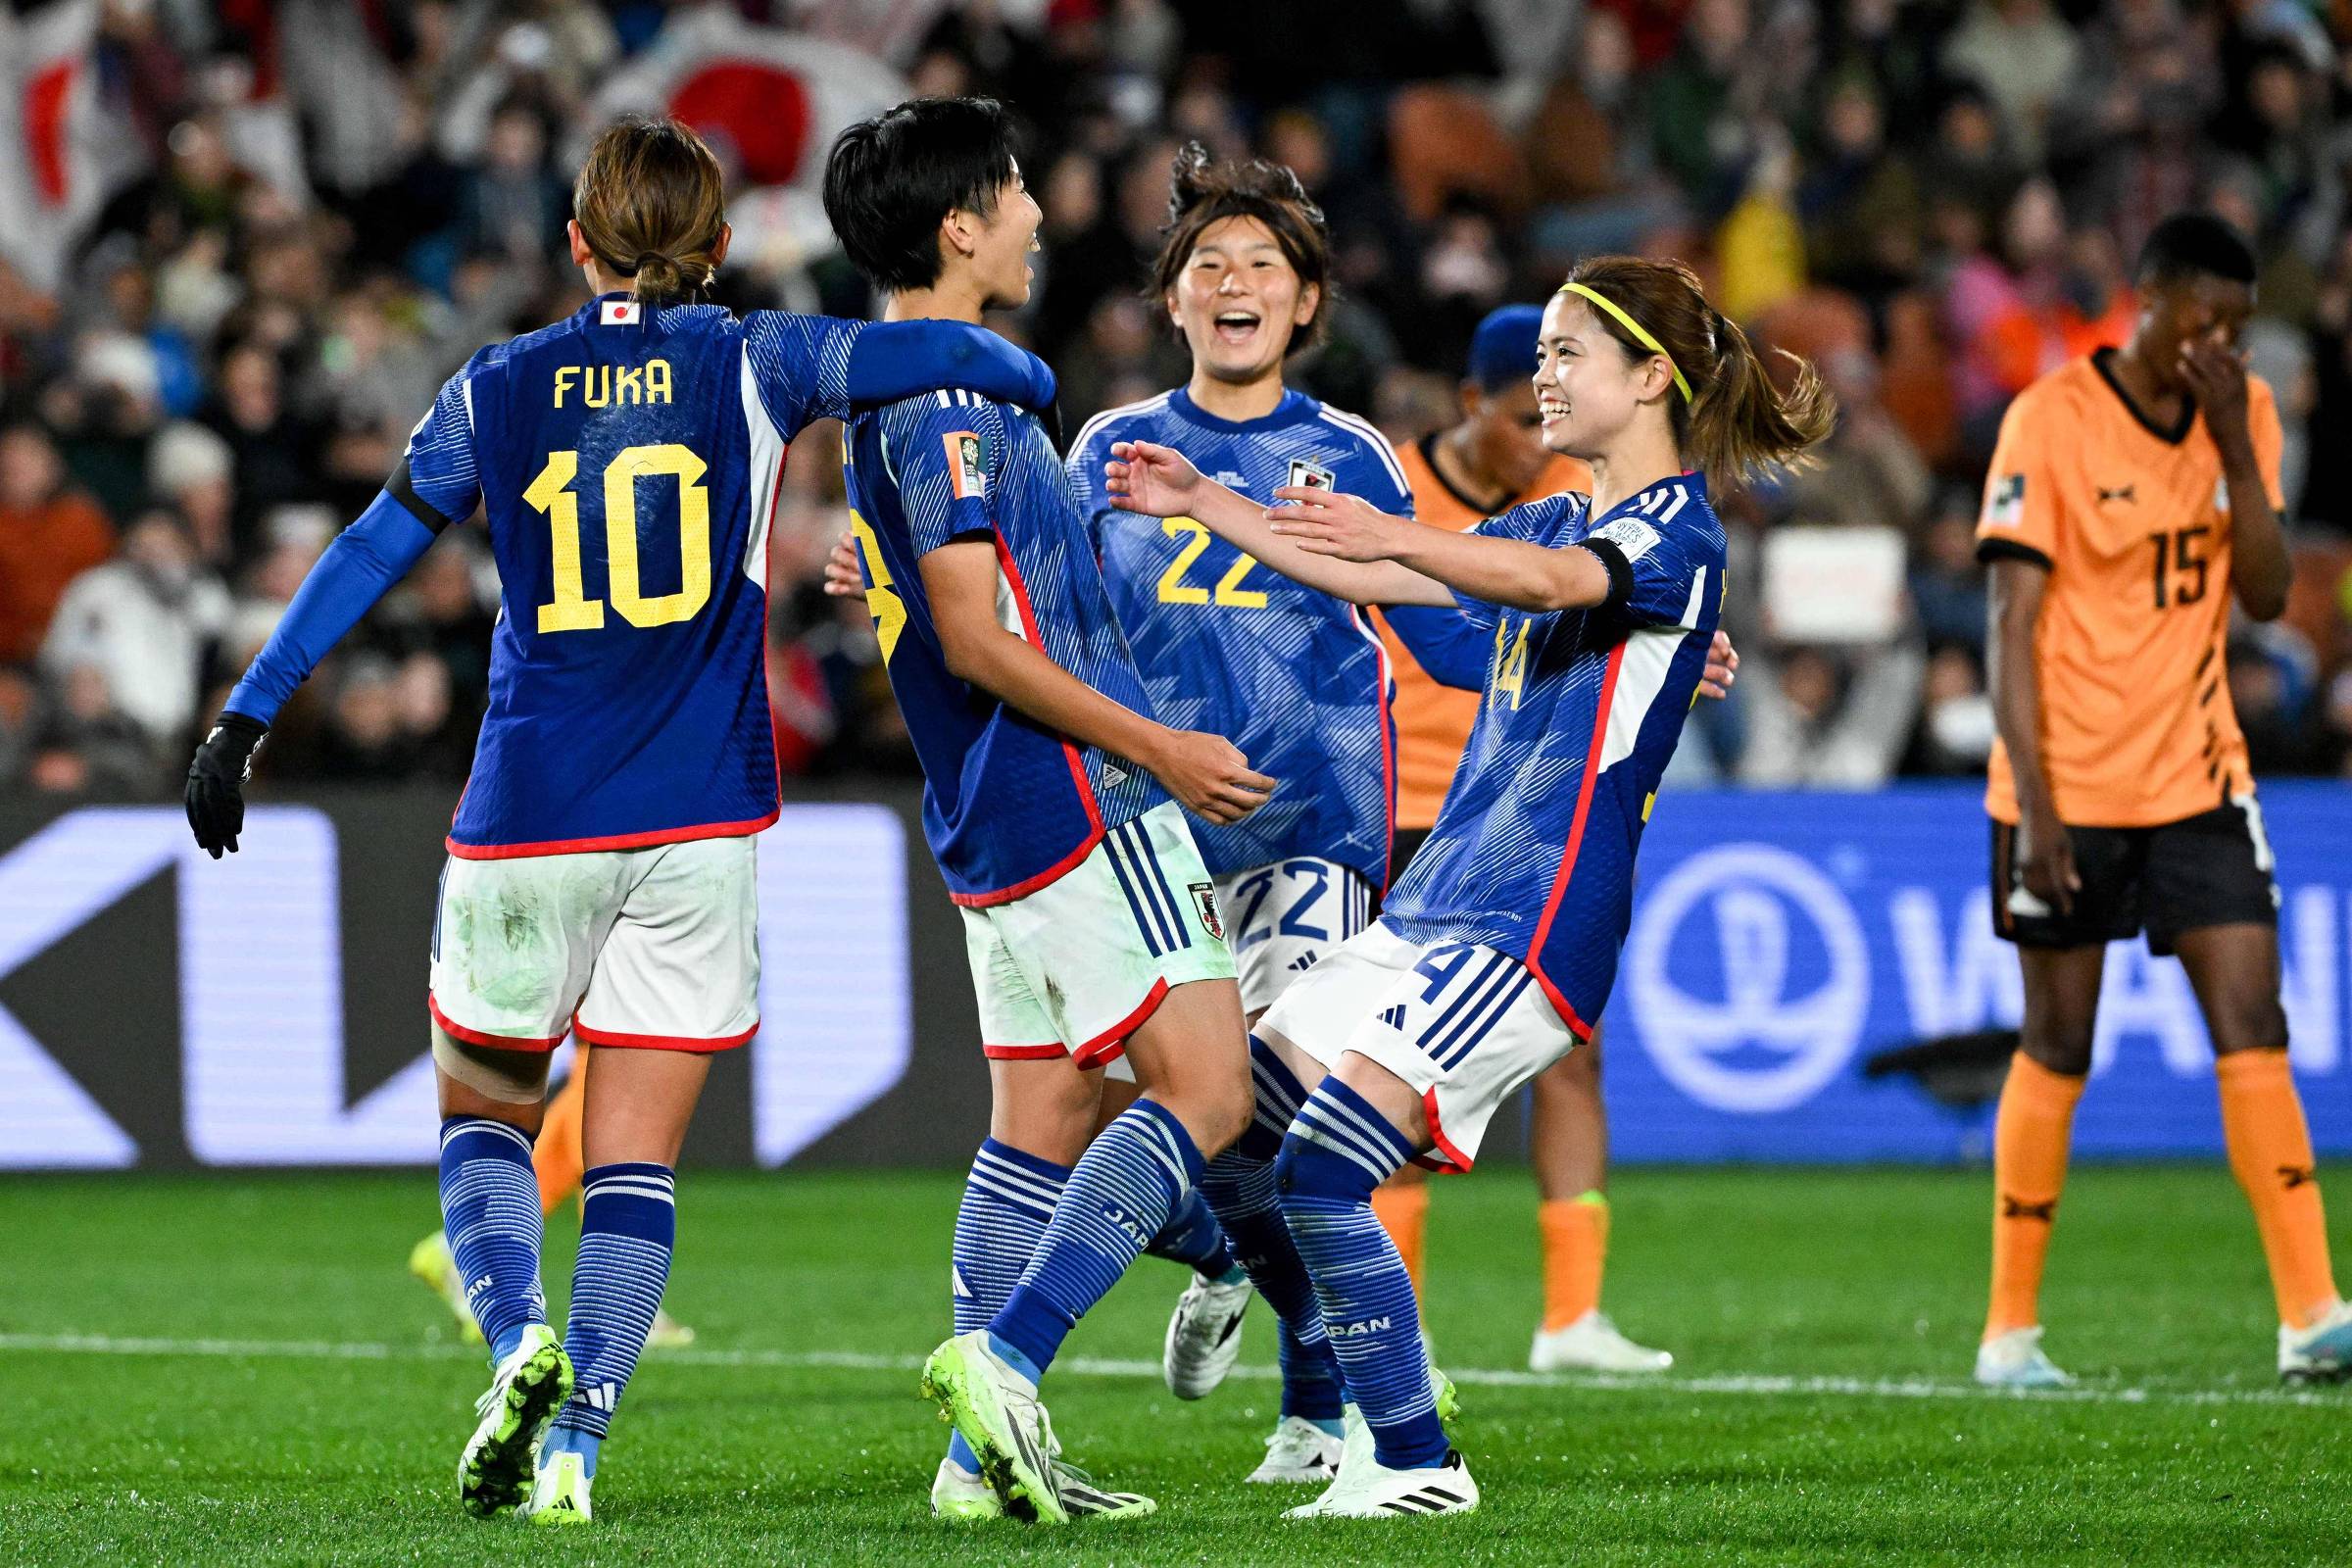 Japan makes 5 in Zambia and applies the biggest rout of the Cup so far